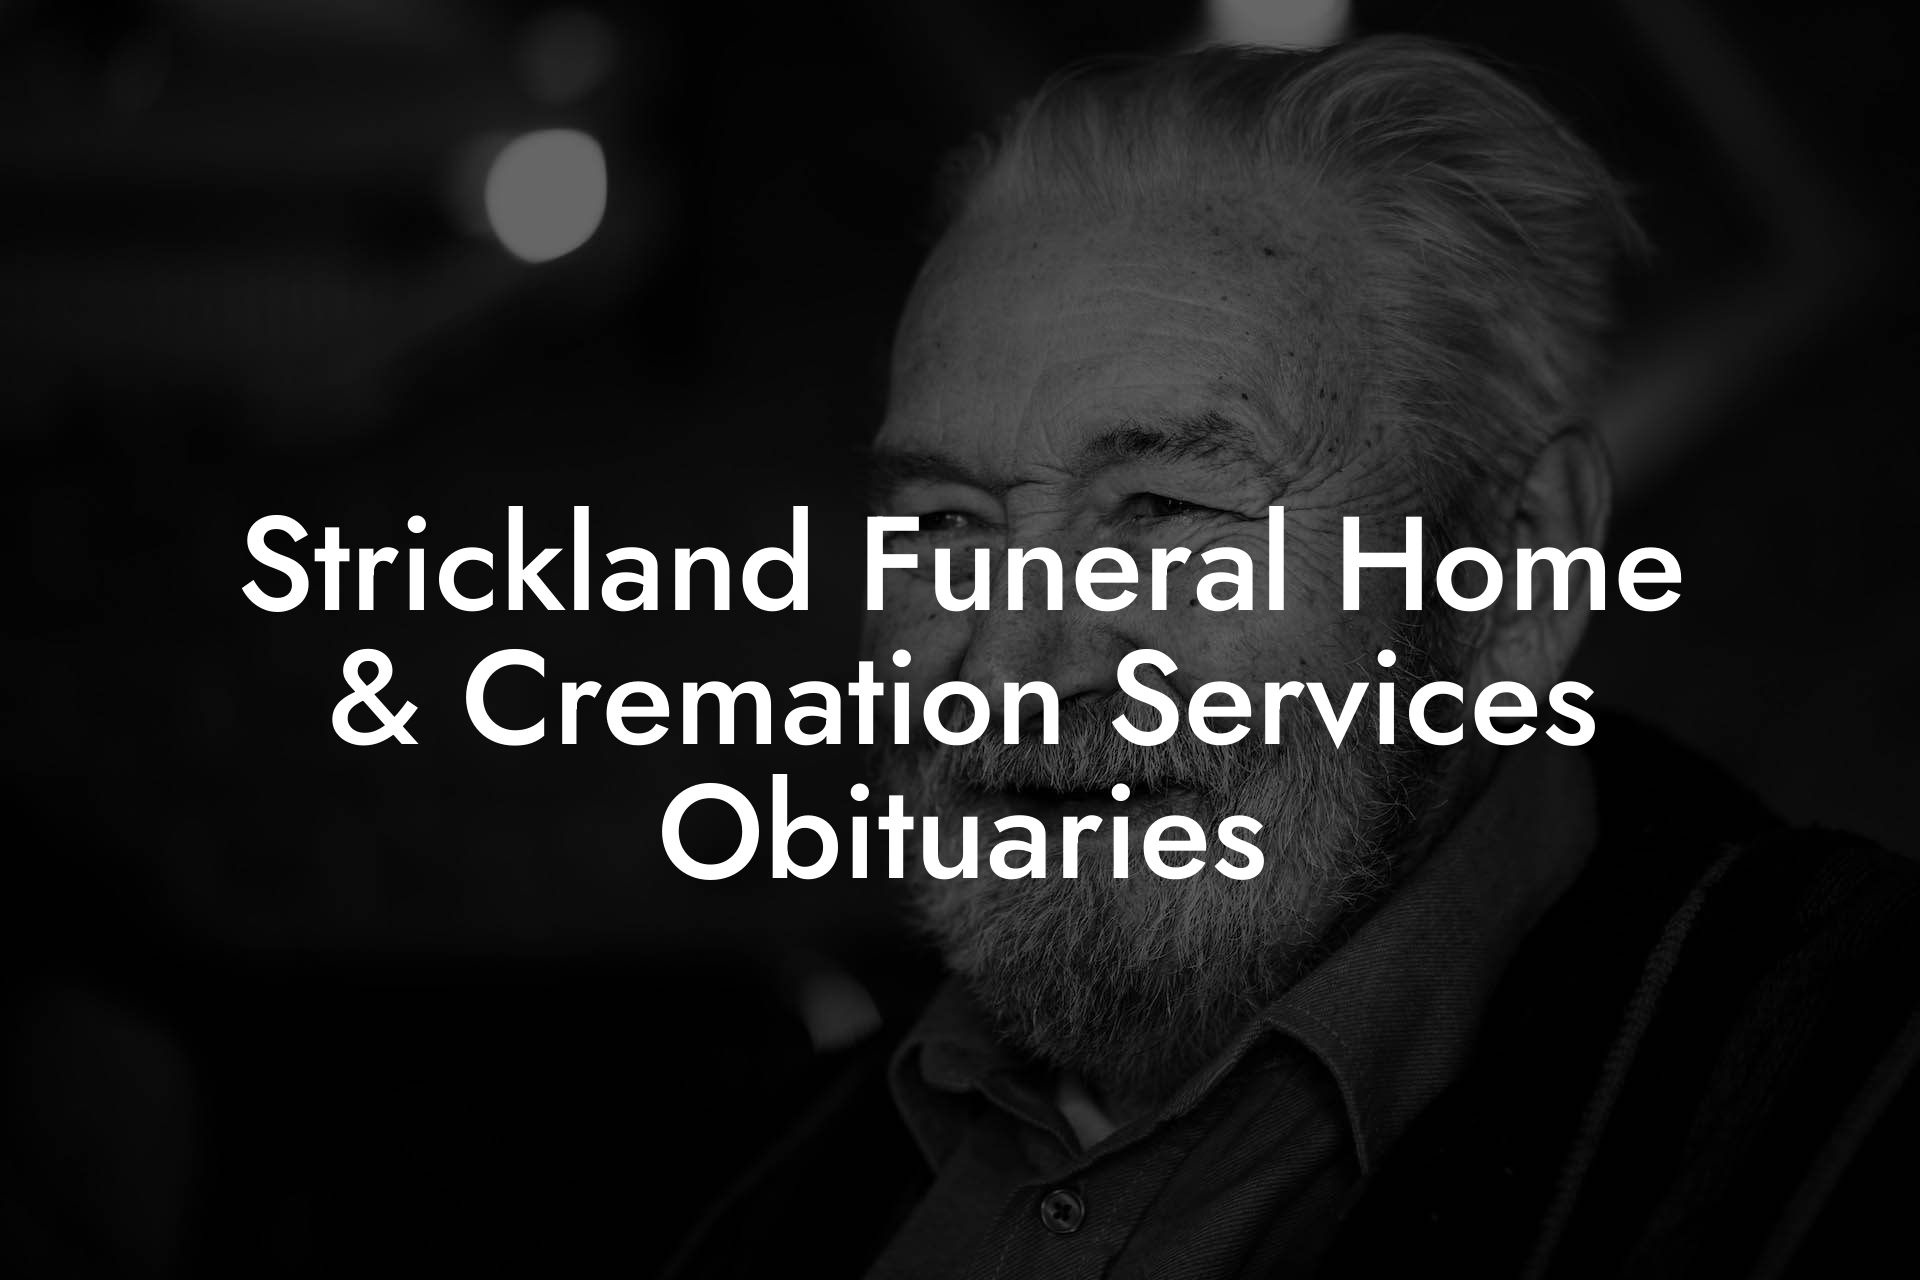 Strickland Funeral Home & Cremation Services Obituaries